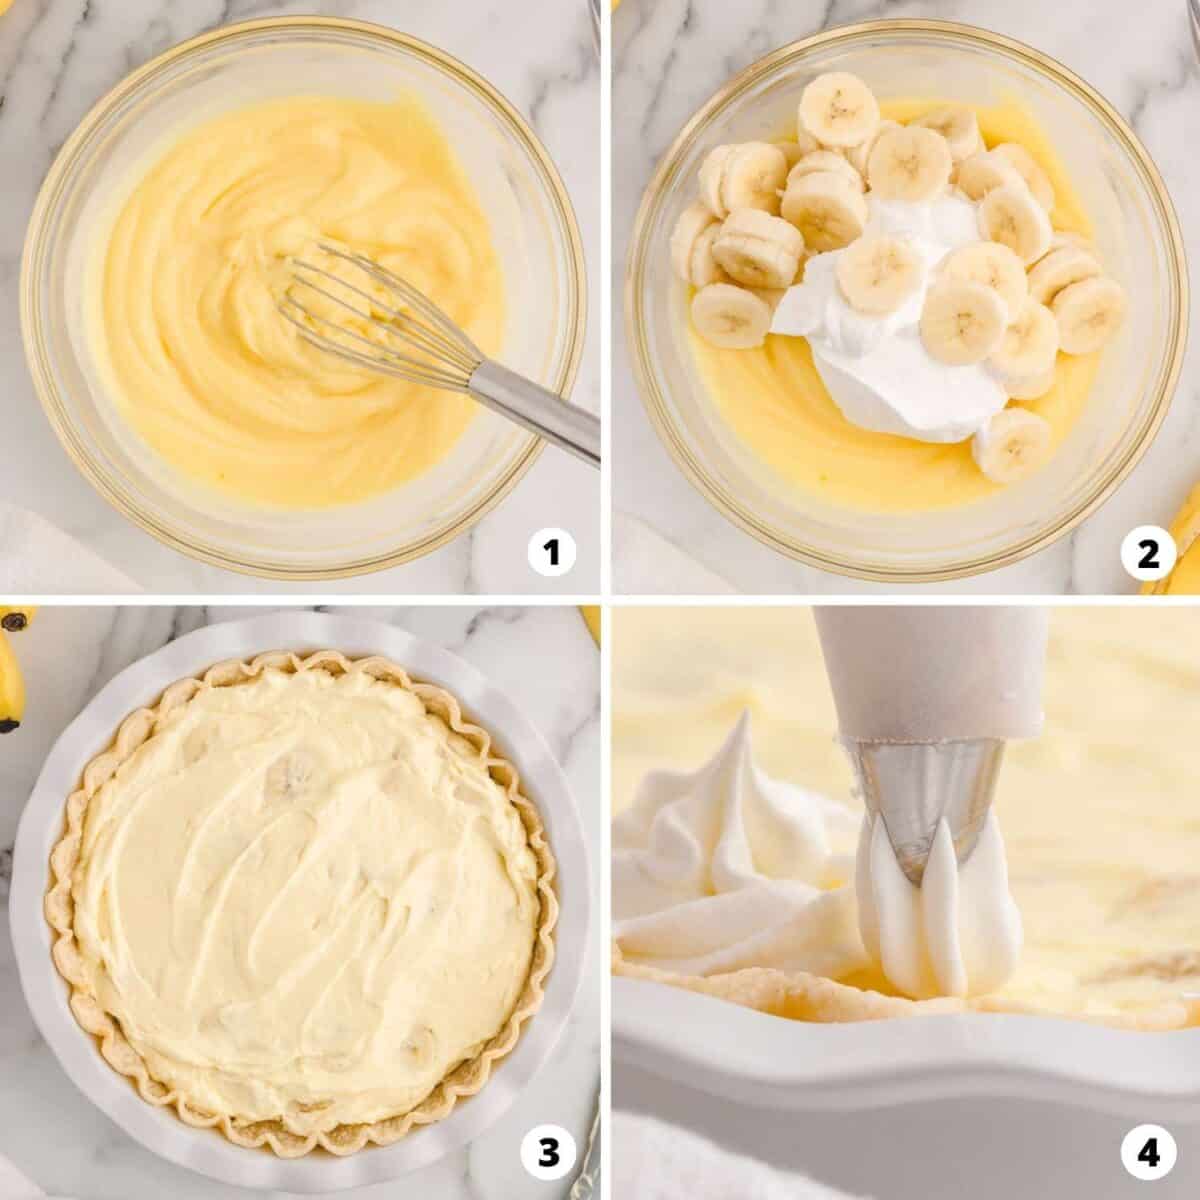 Showing how to make banana cream pie in a 4 step collage.